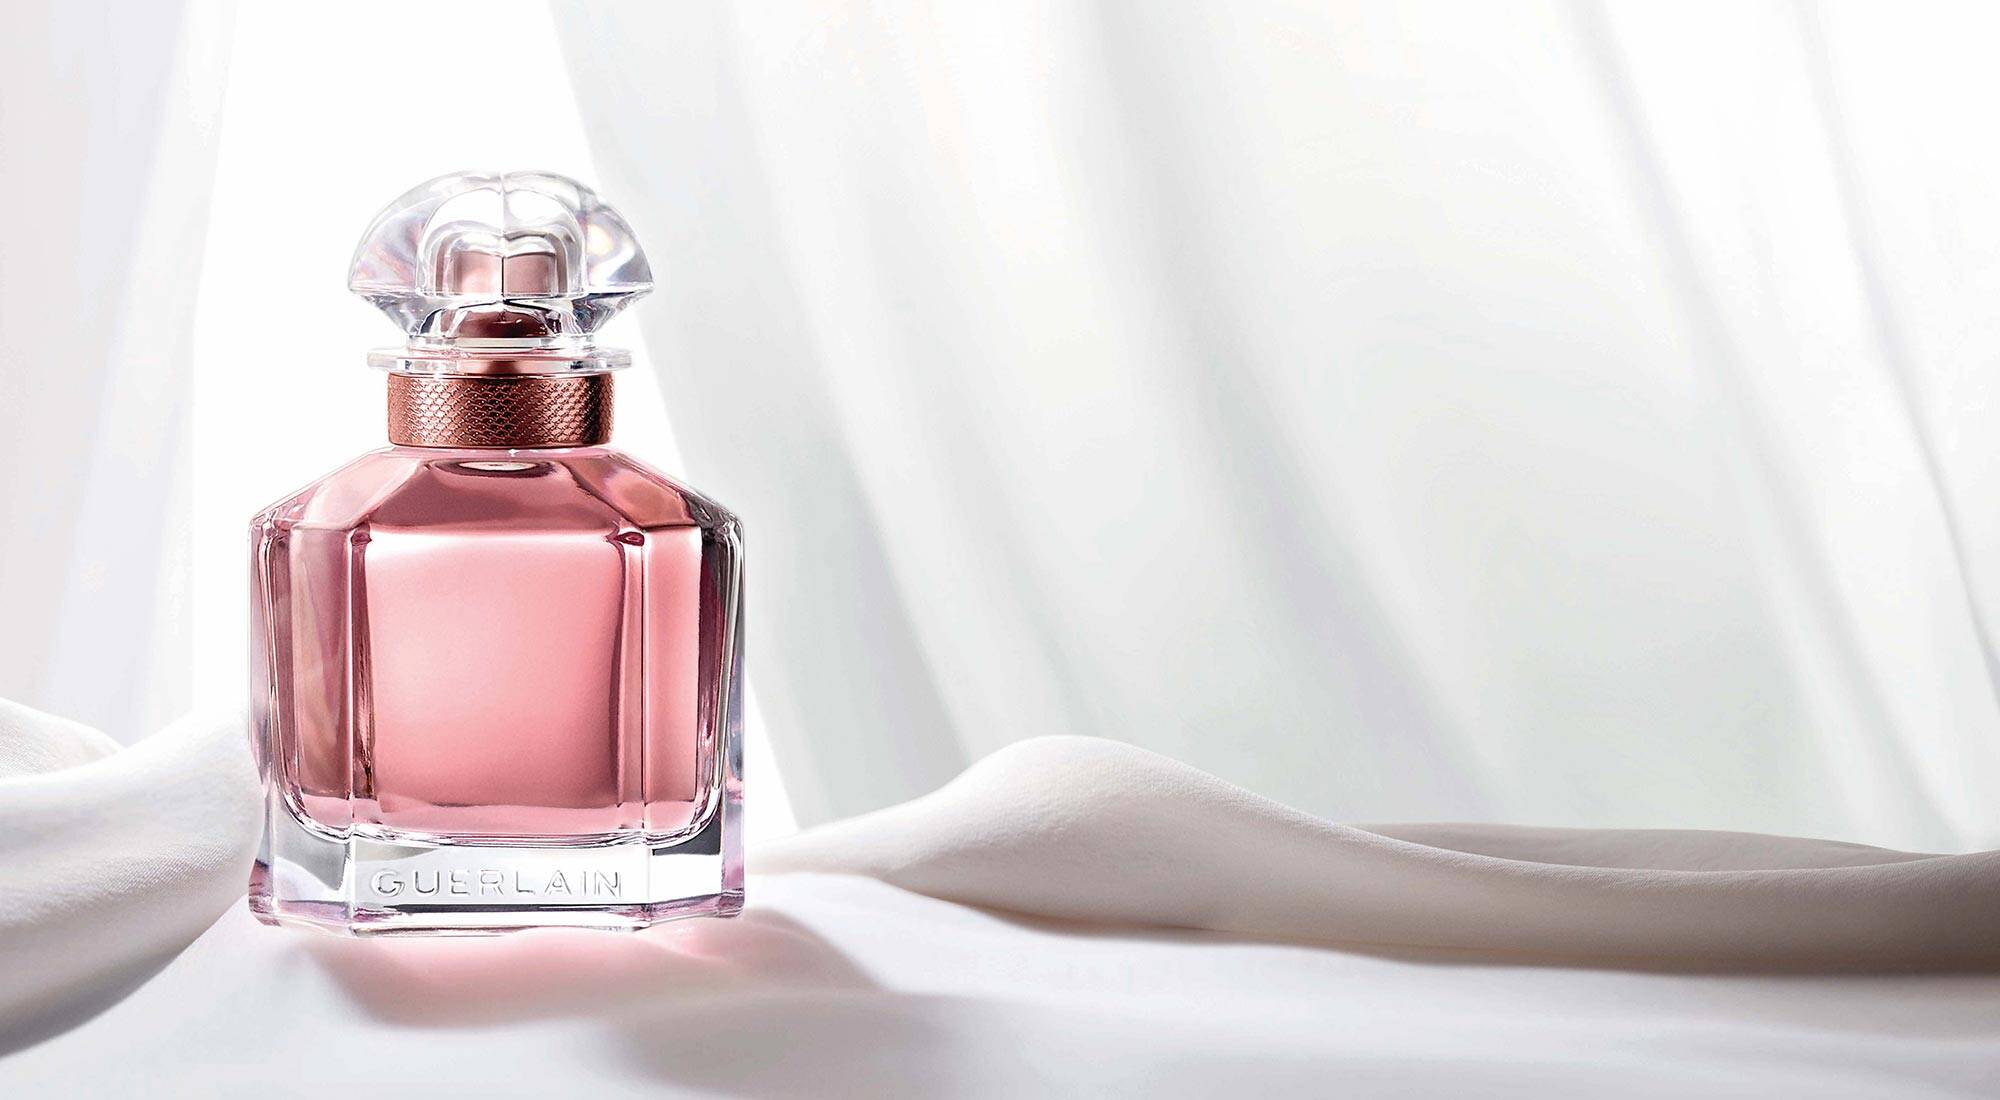 Guerlain unveils the ultimate expression of modern femininity with